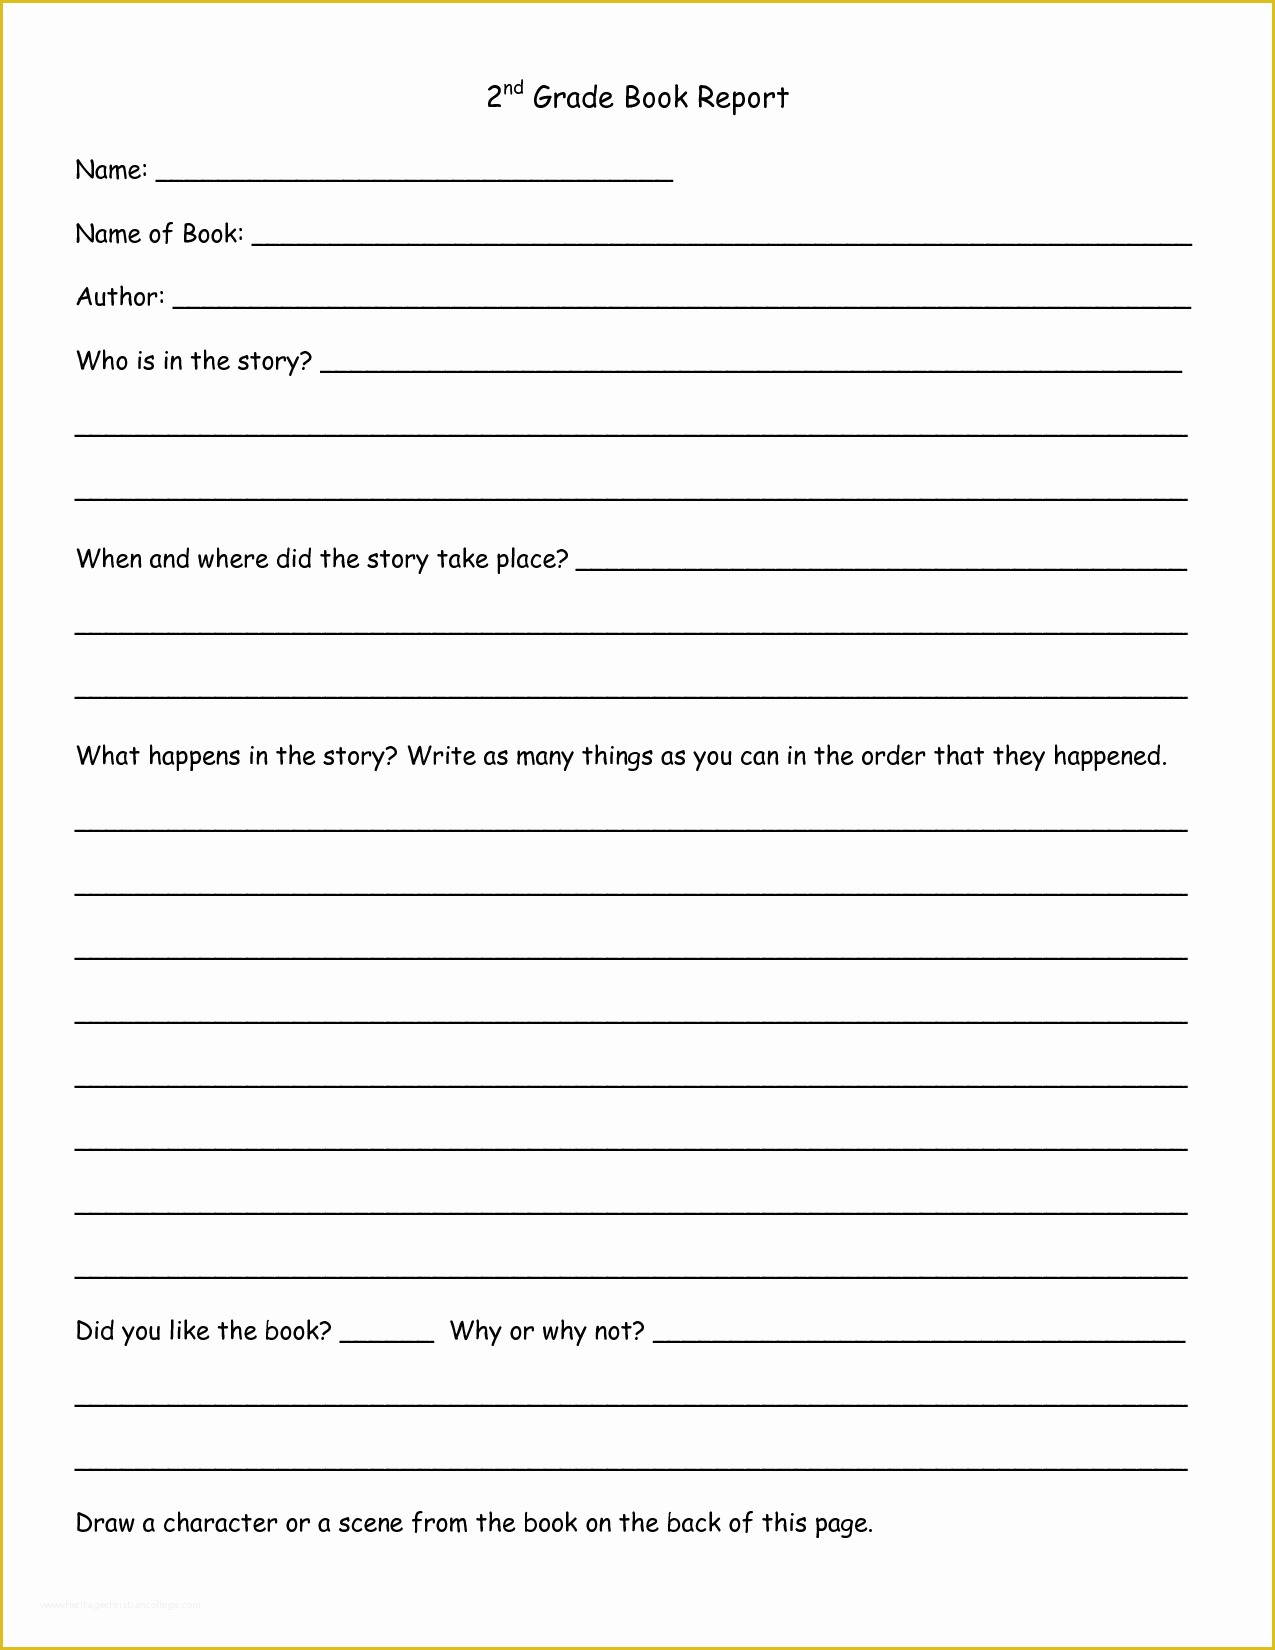 2nd Grade Book Report Template Free Of 2nd Grade Book Report Template Google Search